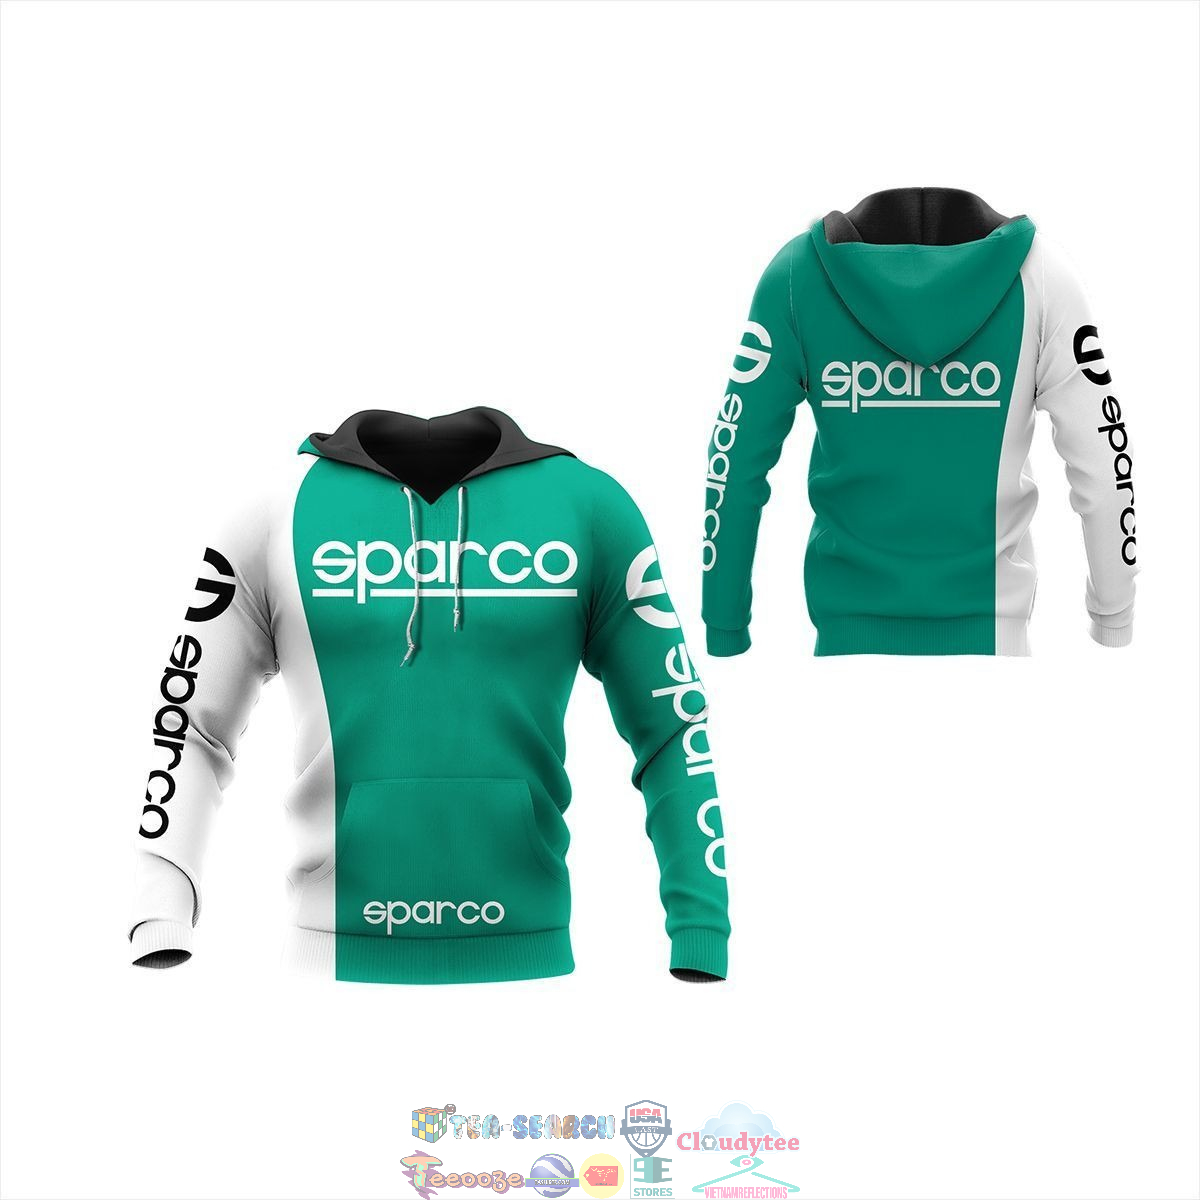 Sparco ver 63 3D hoodie and t-shirt